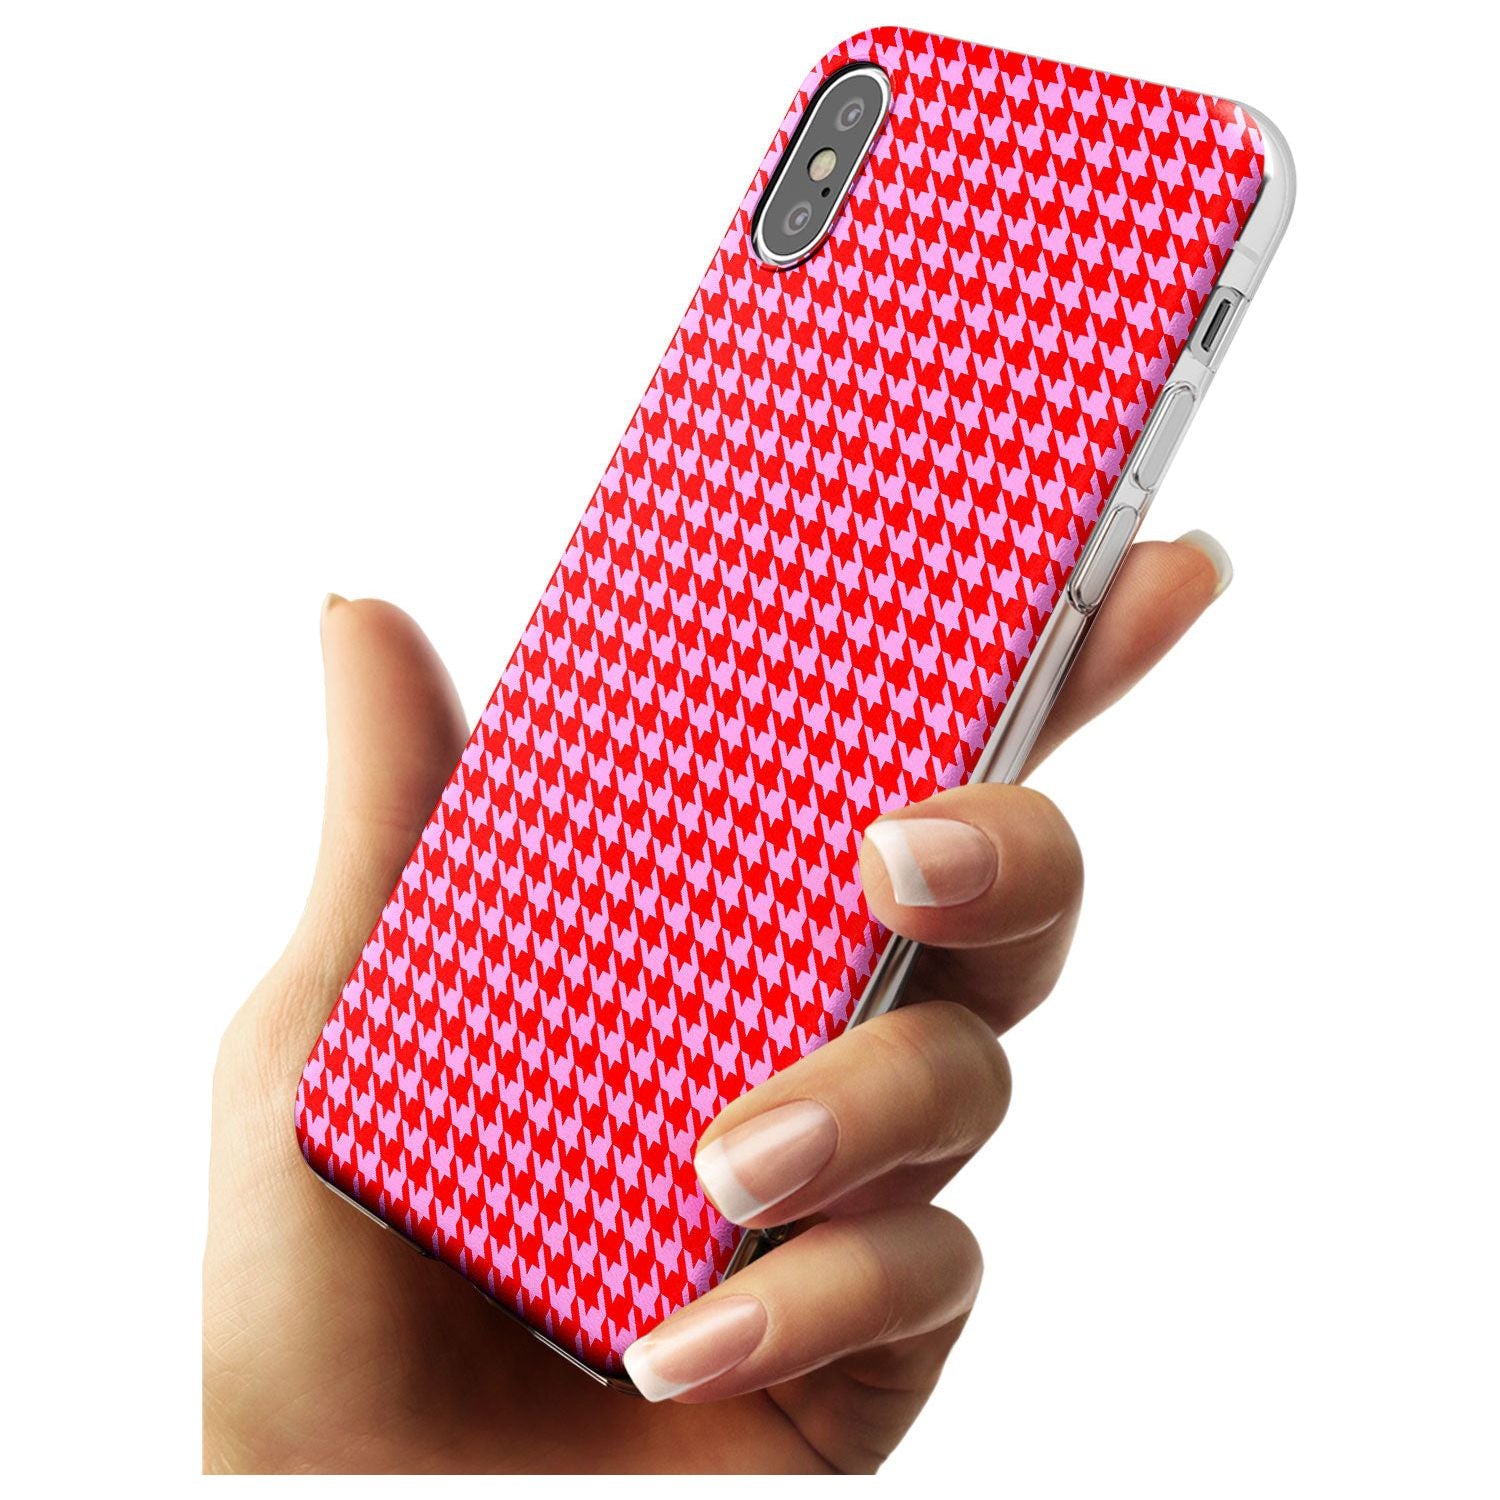 Neon Pink & Red Houndstooth Pattern Slim TPU Phone Case Warehouse X XS Max XR